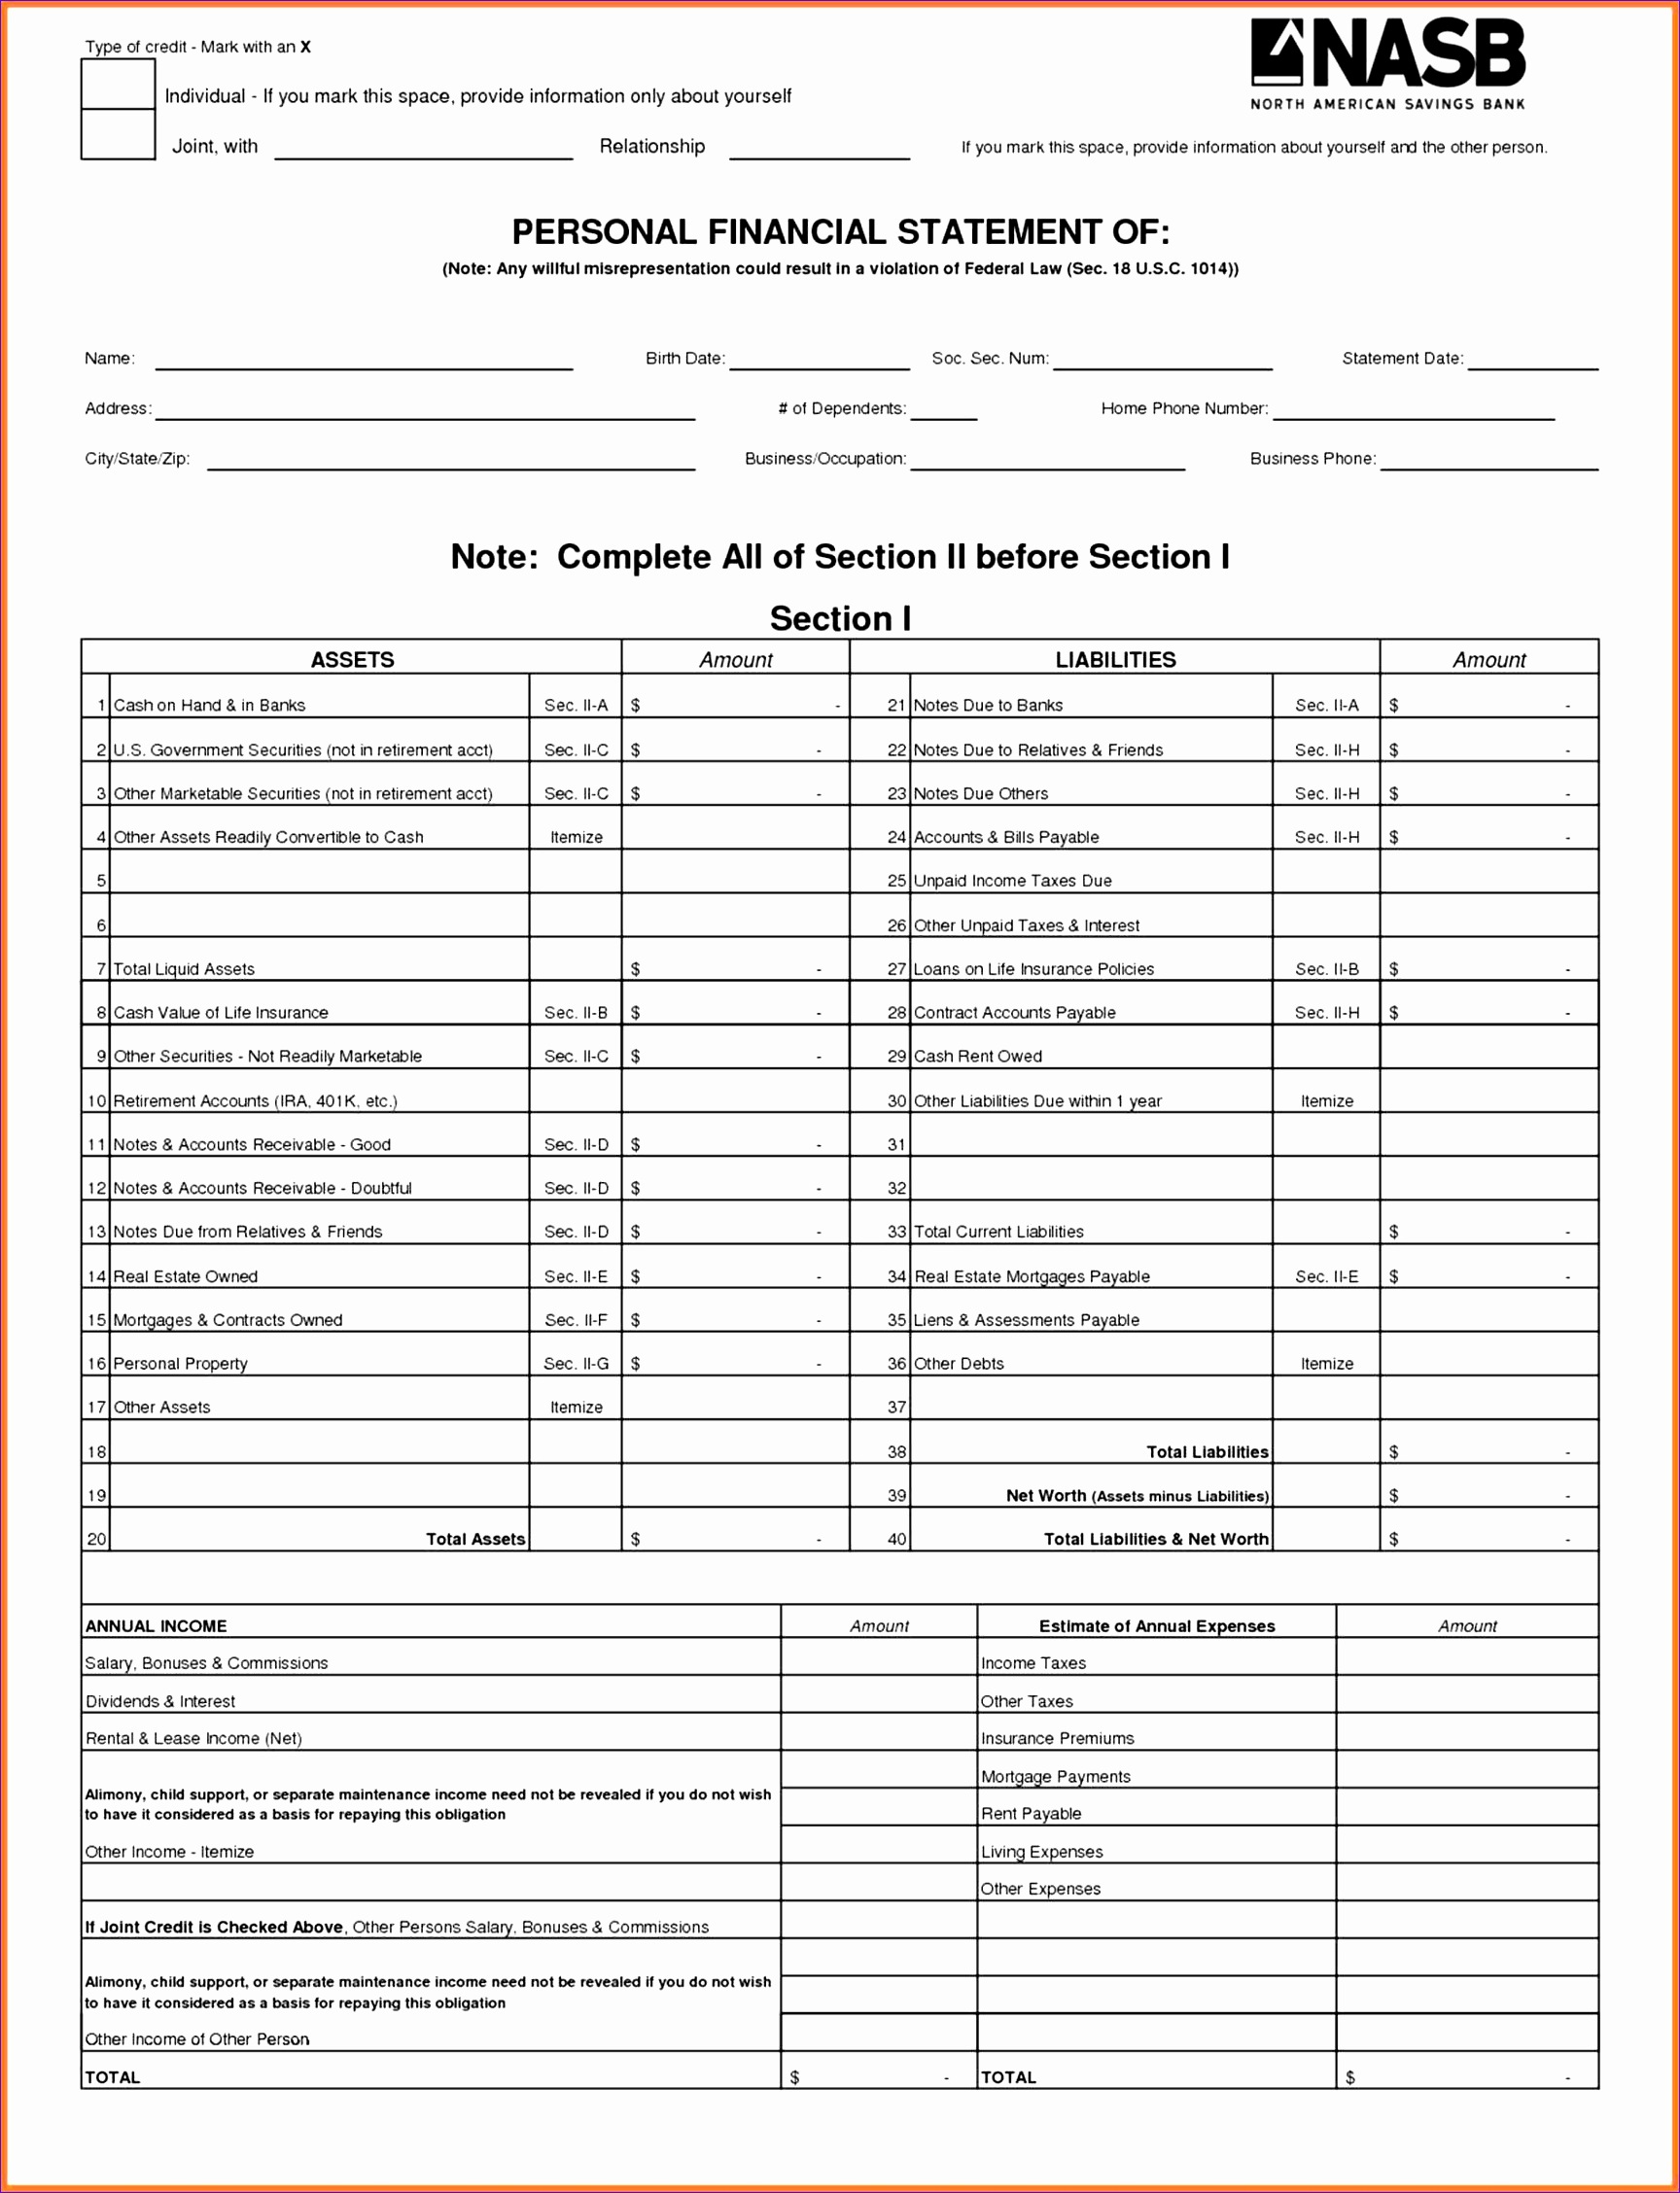 templates intended for bakery how to create spreadsheet in how Inventory Excel Templates to create inventory spreadsheet templates in excel for template